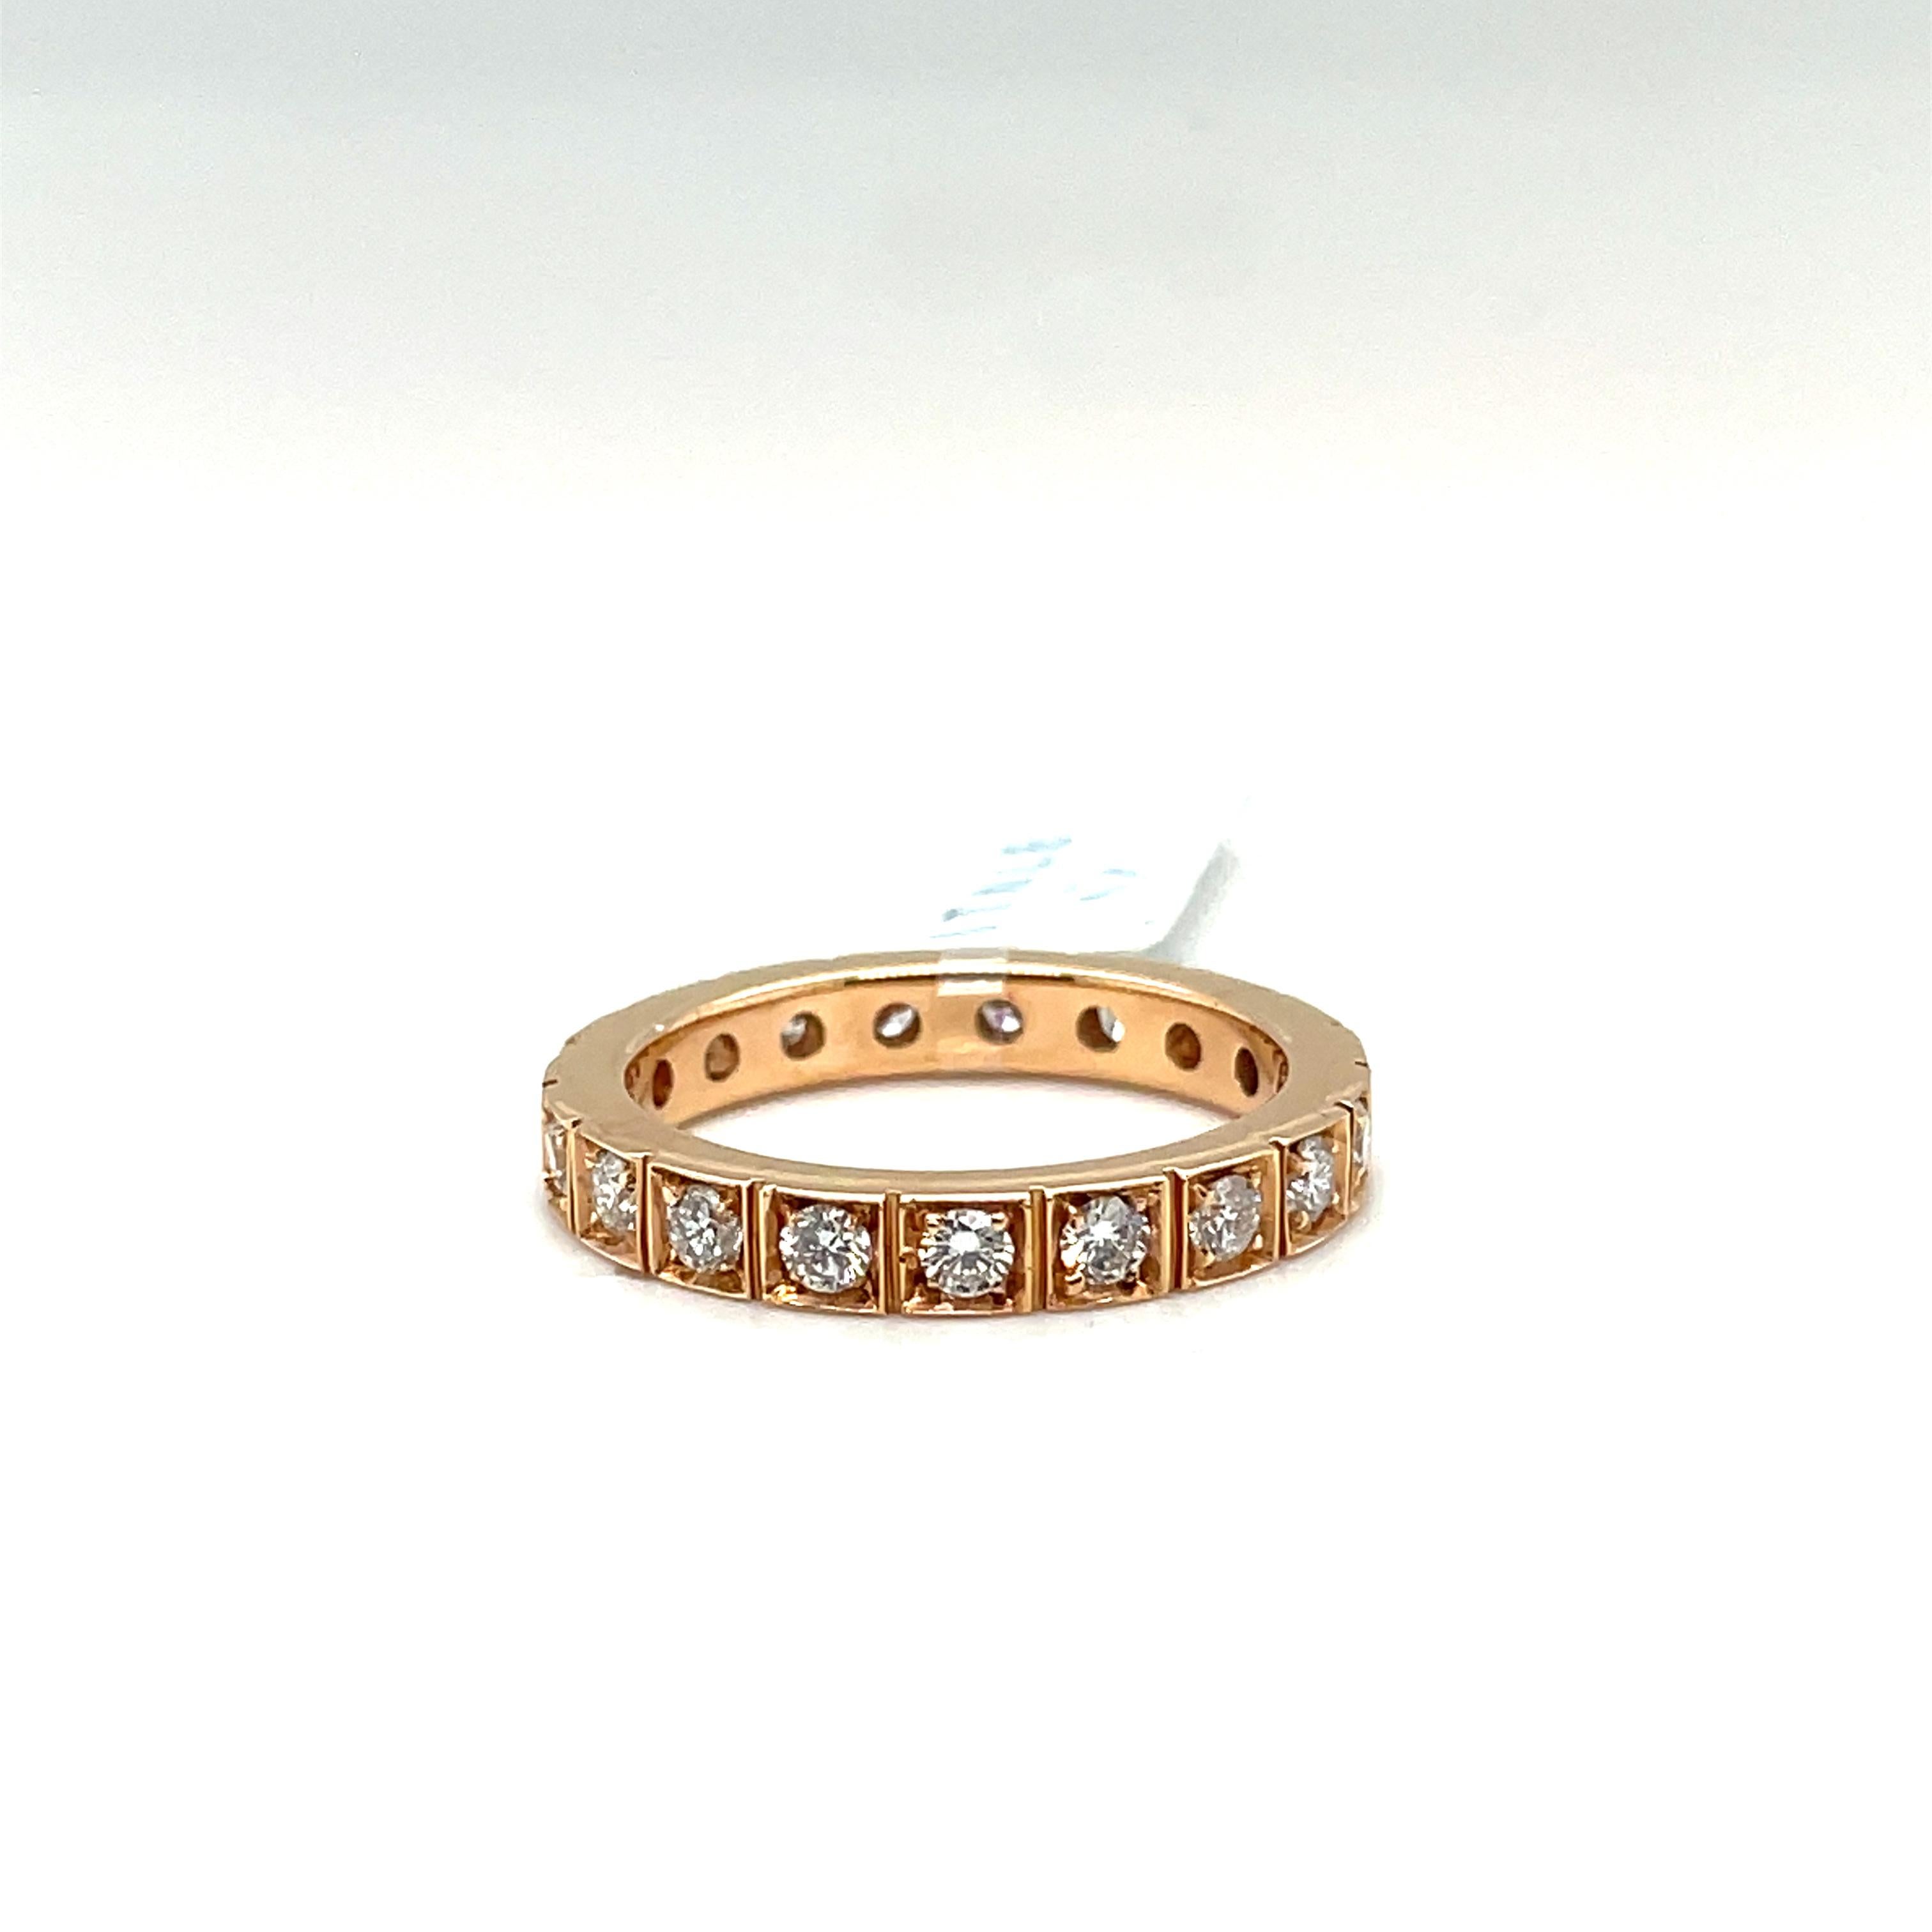 ANNIVERSARY Wedding Band Damier-Ama in rose gold 18Kt 5.40 gr with natural diamonds G color VS clarity in total 1 ct.

This anniversary collection represents a tribute to the exceptional
craftsmanship, enduring elegance, and timeless beauty that had